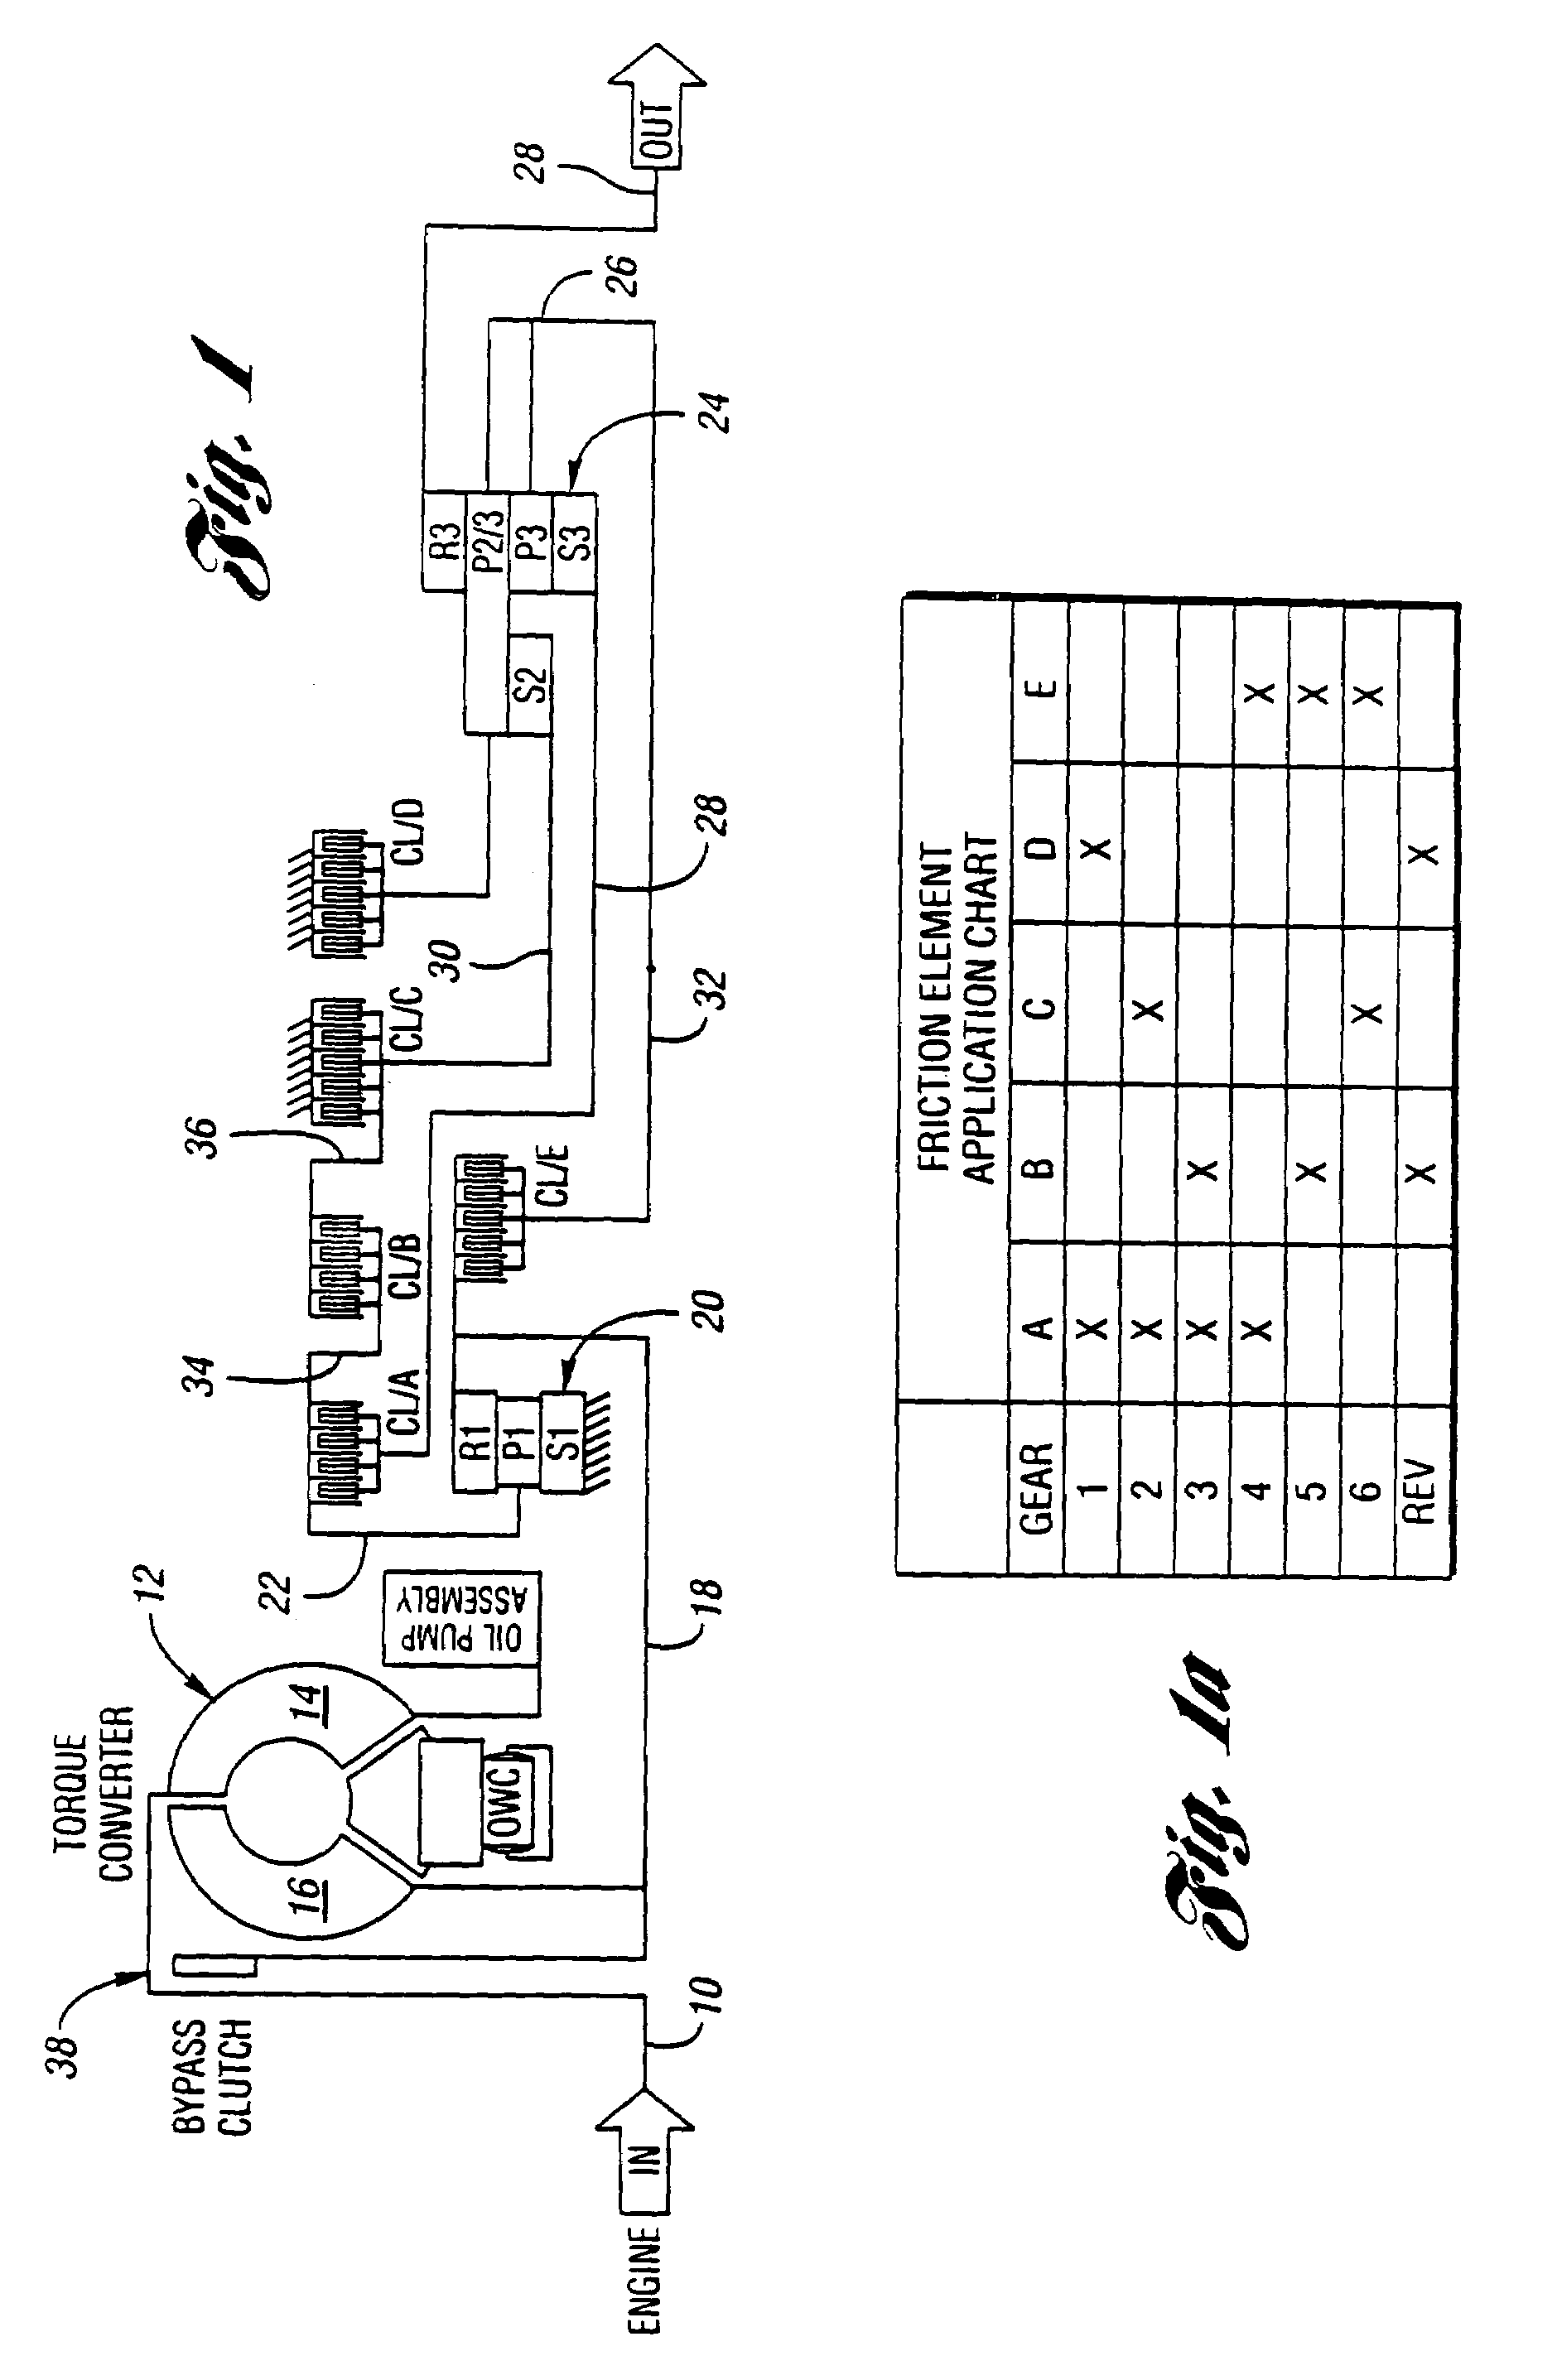 Adaptive pressure control method for achieving synchronous upshifts in a multiple-ratio transmission